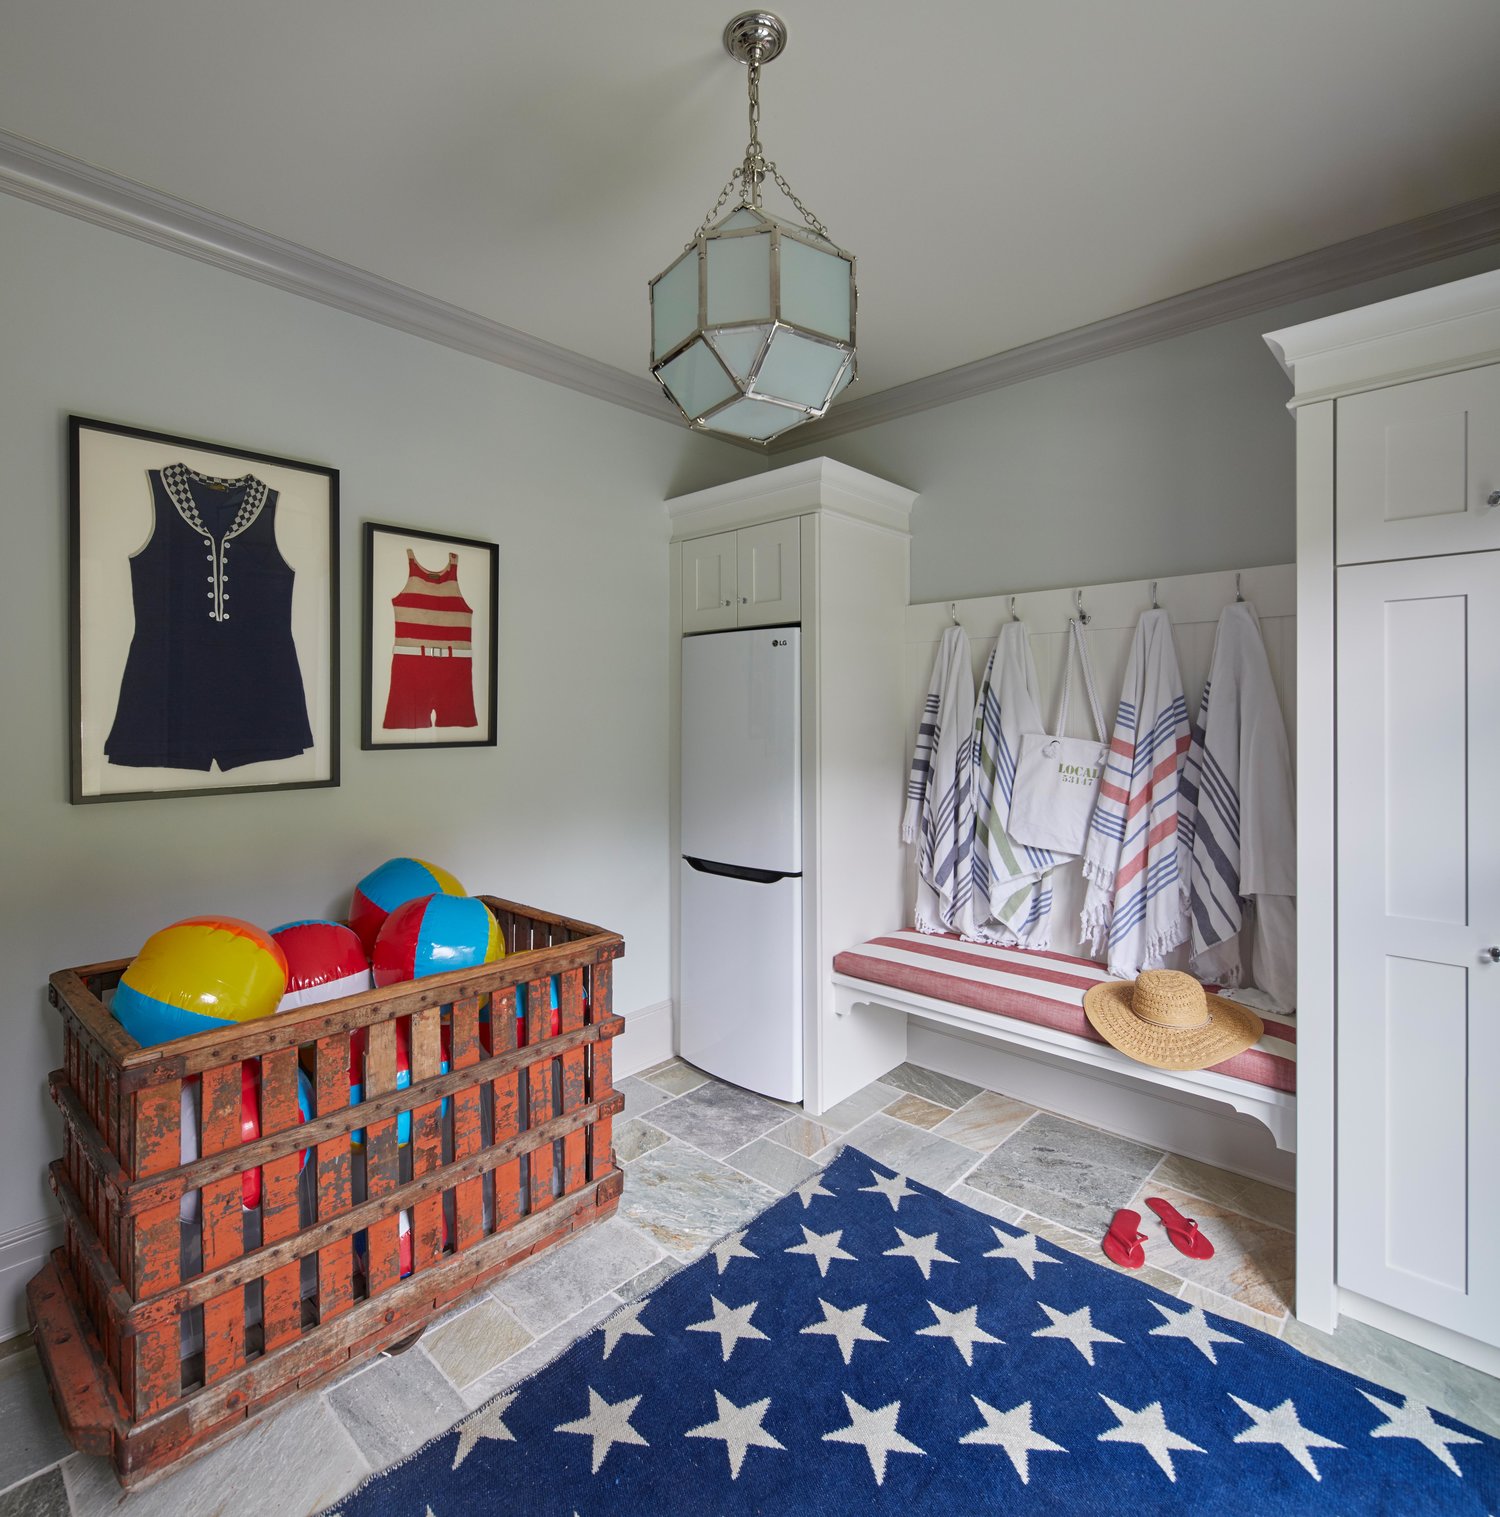 Cheerful red, white and blue pool cabana or mud room with star rug. Come see more interior design inspiration from Elizabeth Drake. Photo by Werner Straube. #interiordesign #classicdesign #traditionaldecor #housetour #elizabethdrake